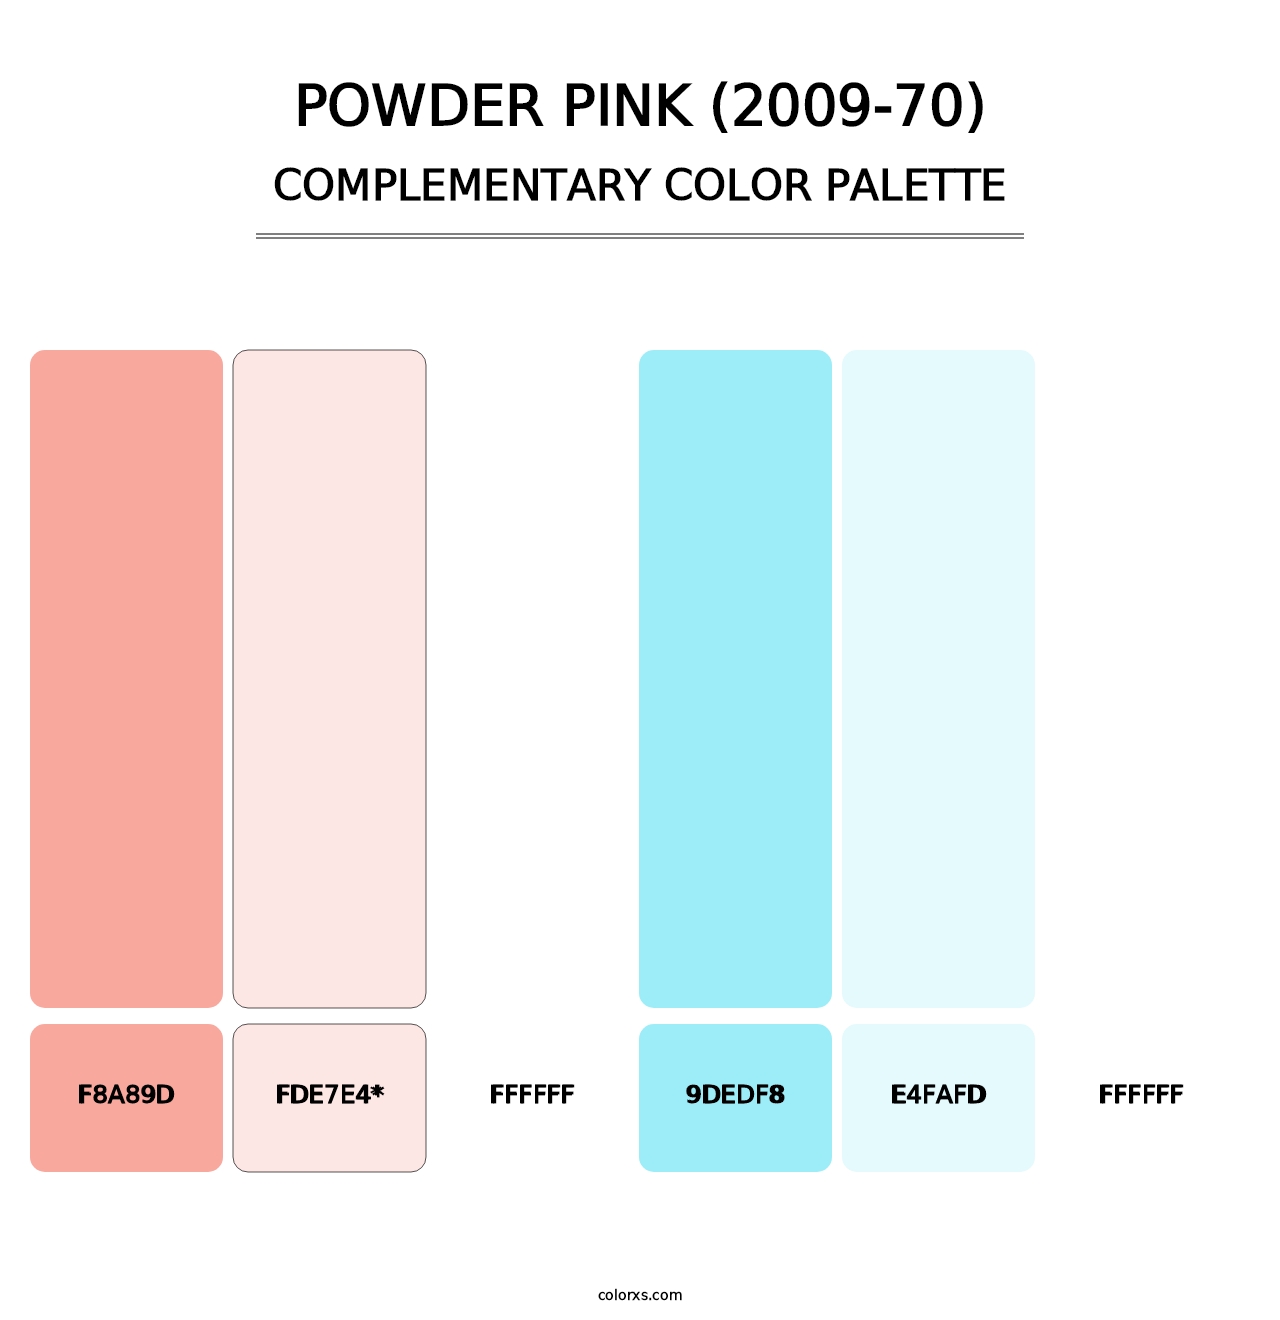 Powder Pink (2009-70) - Complementary Color Palette